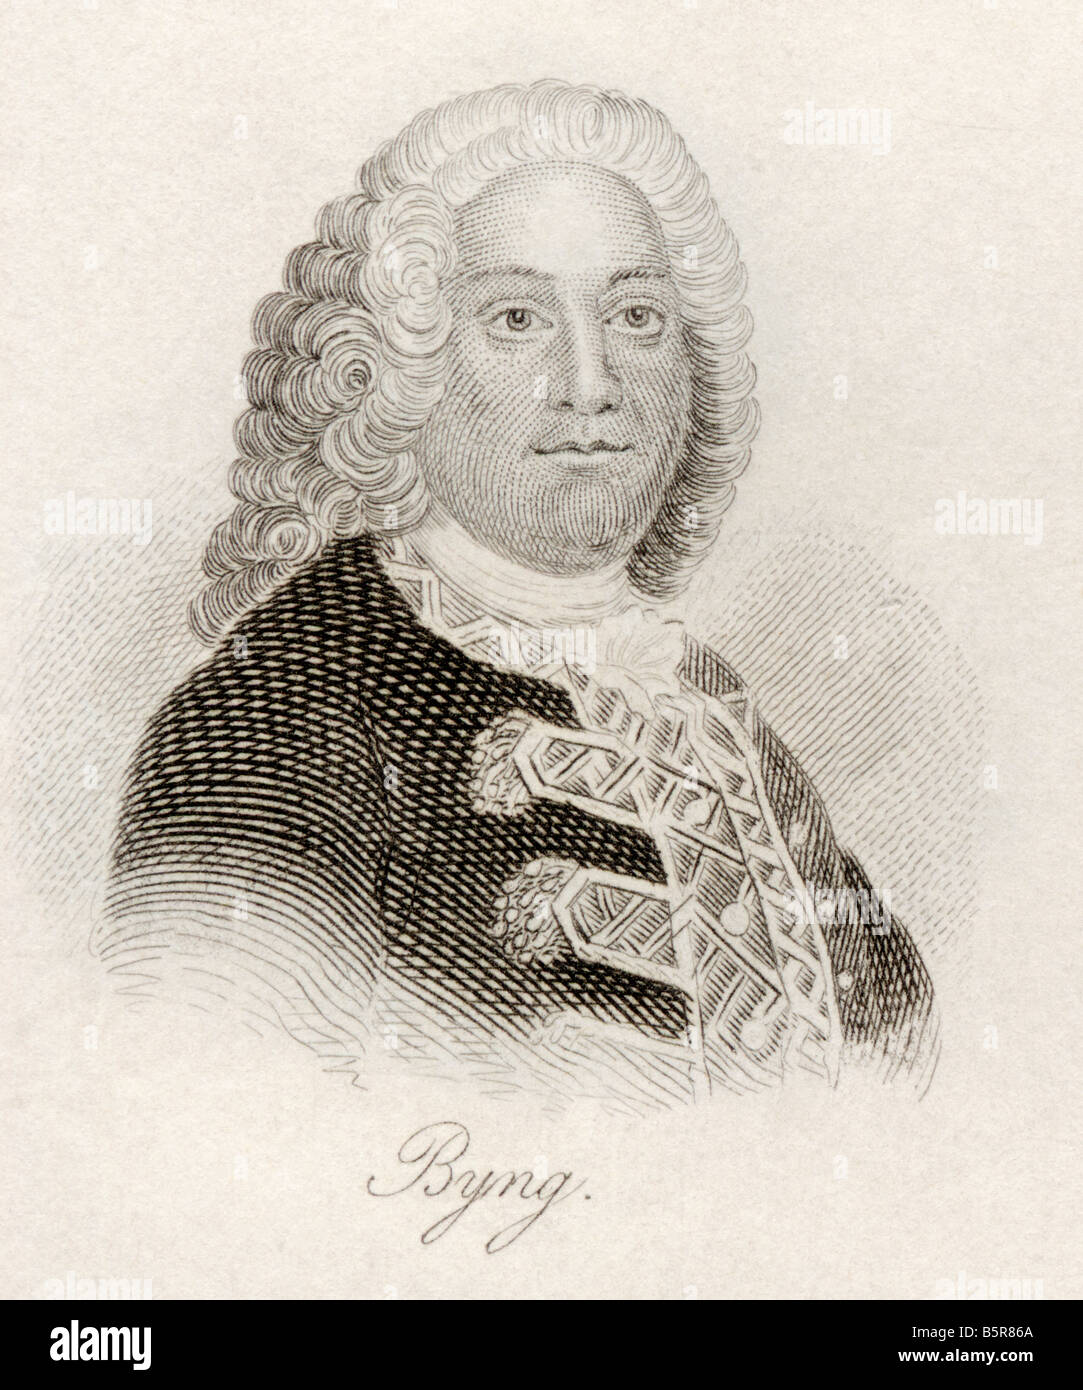 John Byng, 1704 -1757.  British Admiral. From the book Crabb's Historical Dictionary, published 1825. Stock Photo